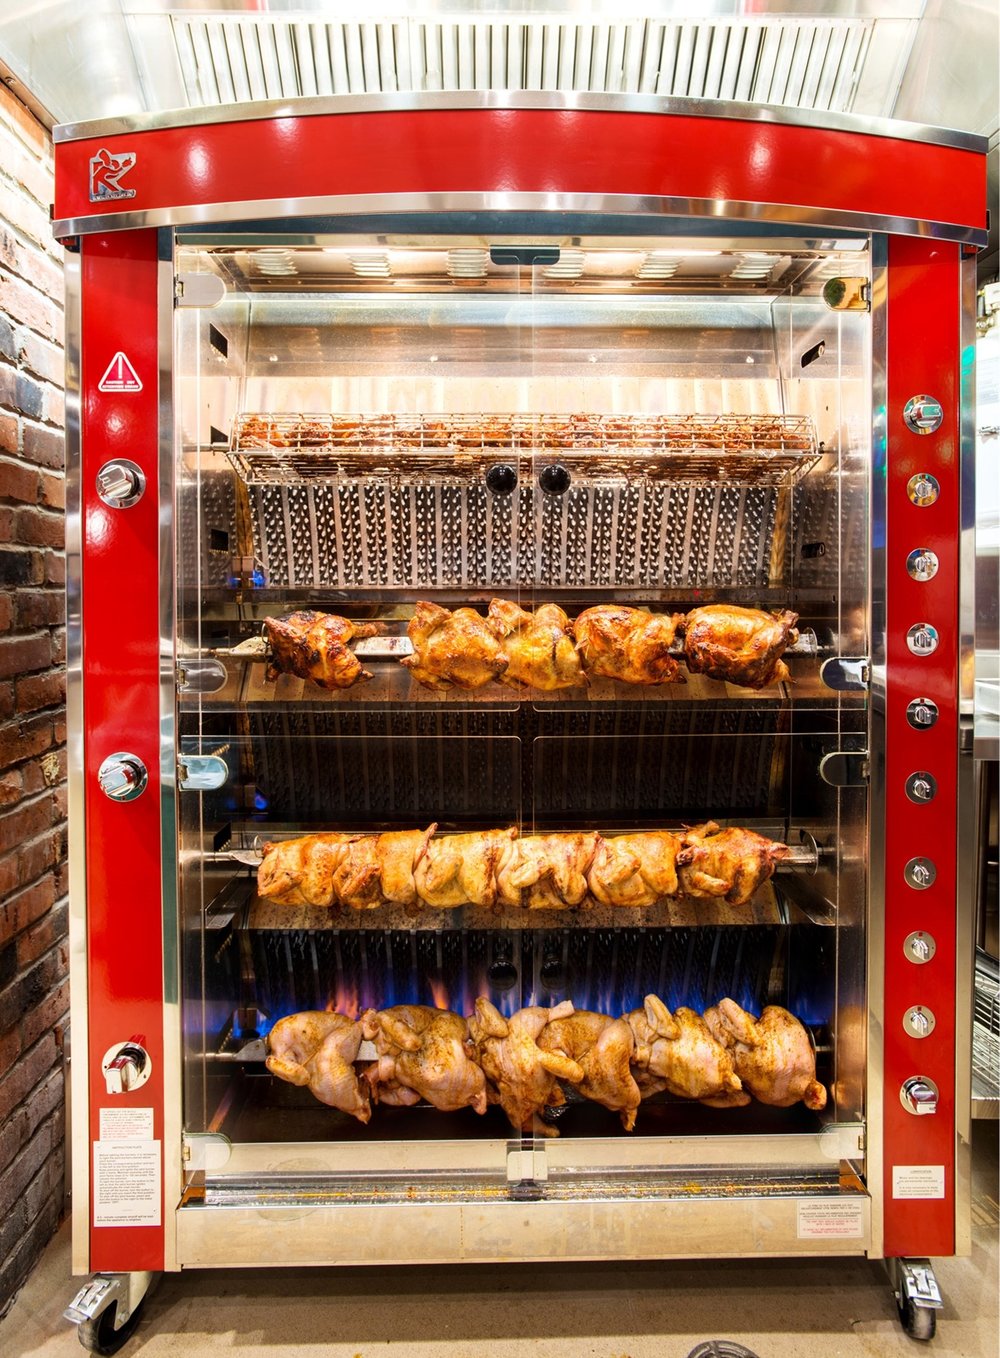   Portobello , at the  Fairmont Chateau Whistler , is upscale fast casual devoted to delicious details and good service. Its recent multi-million dollar transformation included a battaltion of swanky new kitchen tools like this Rotisol rotisserie, wh